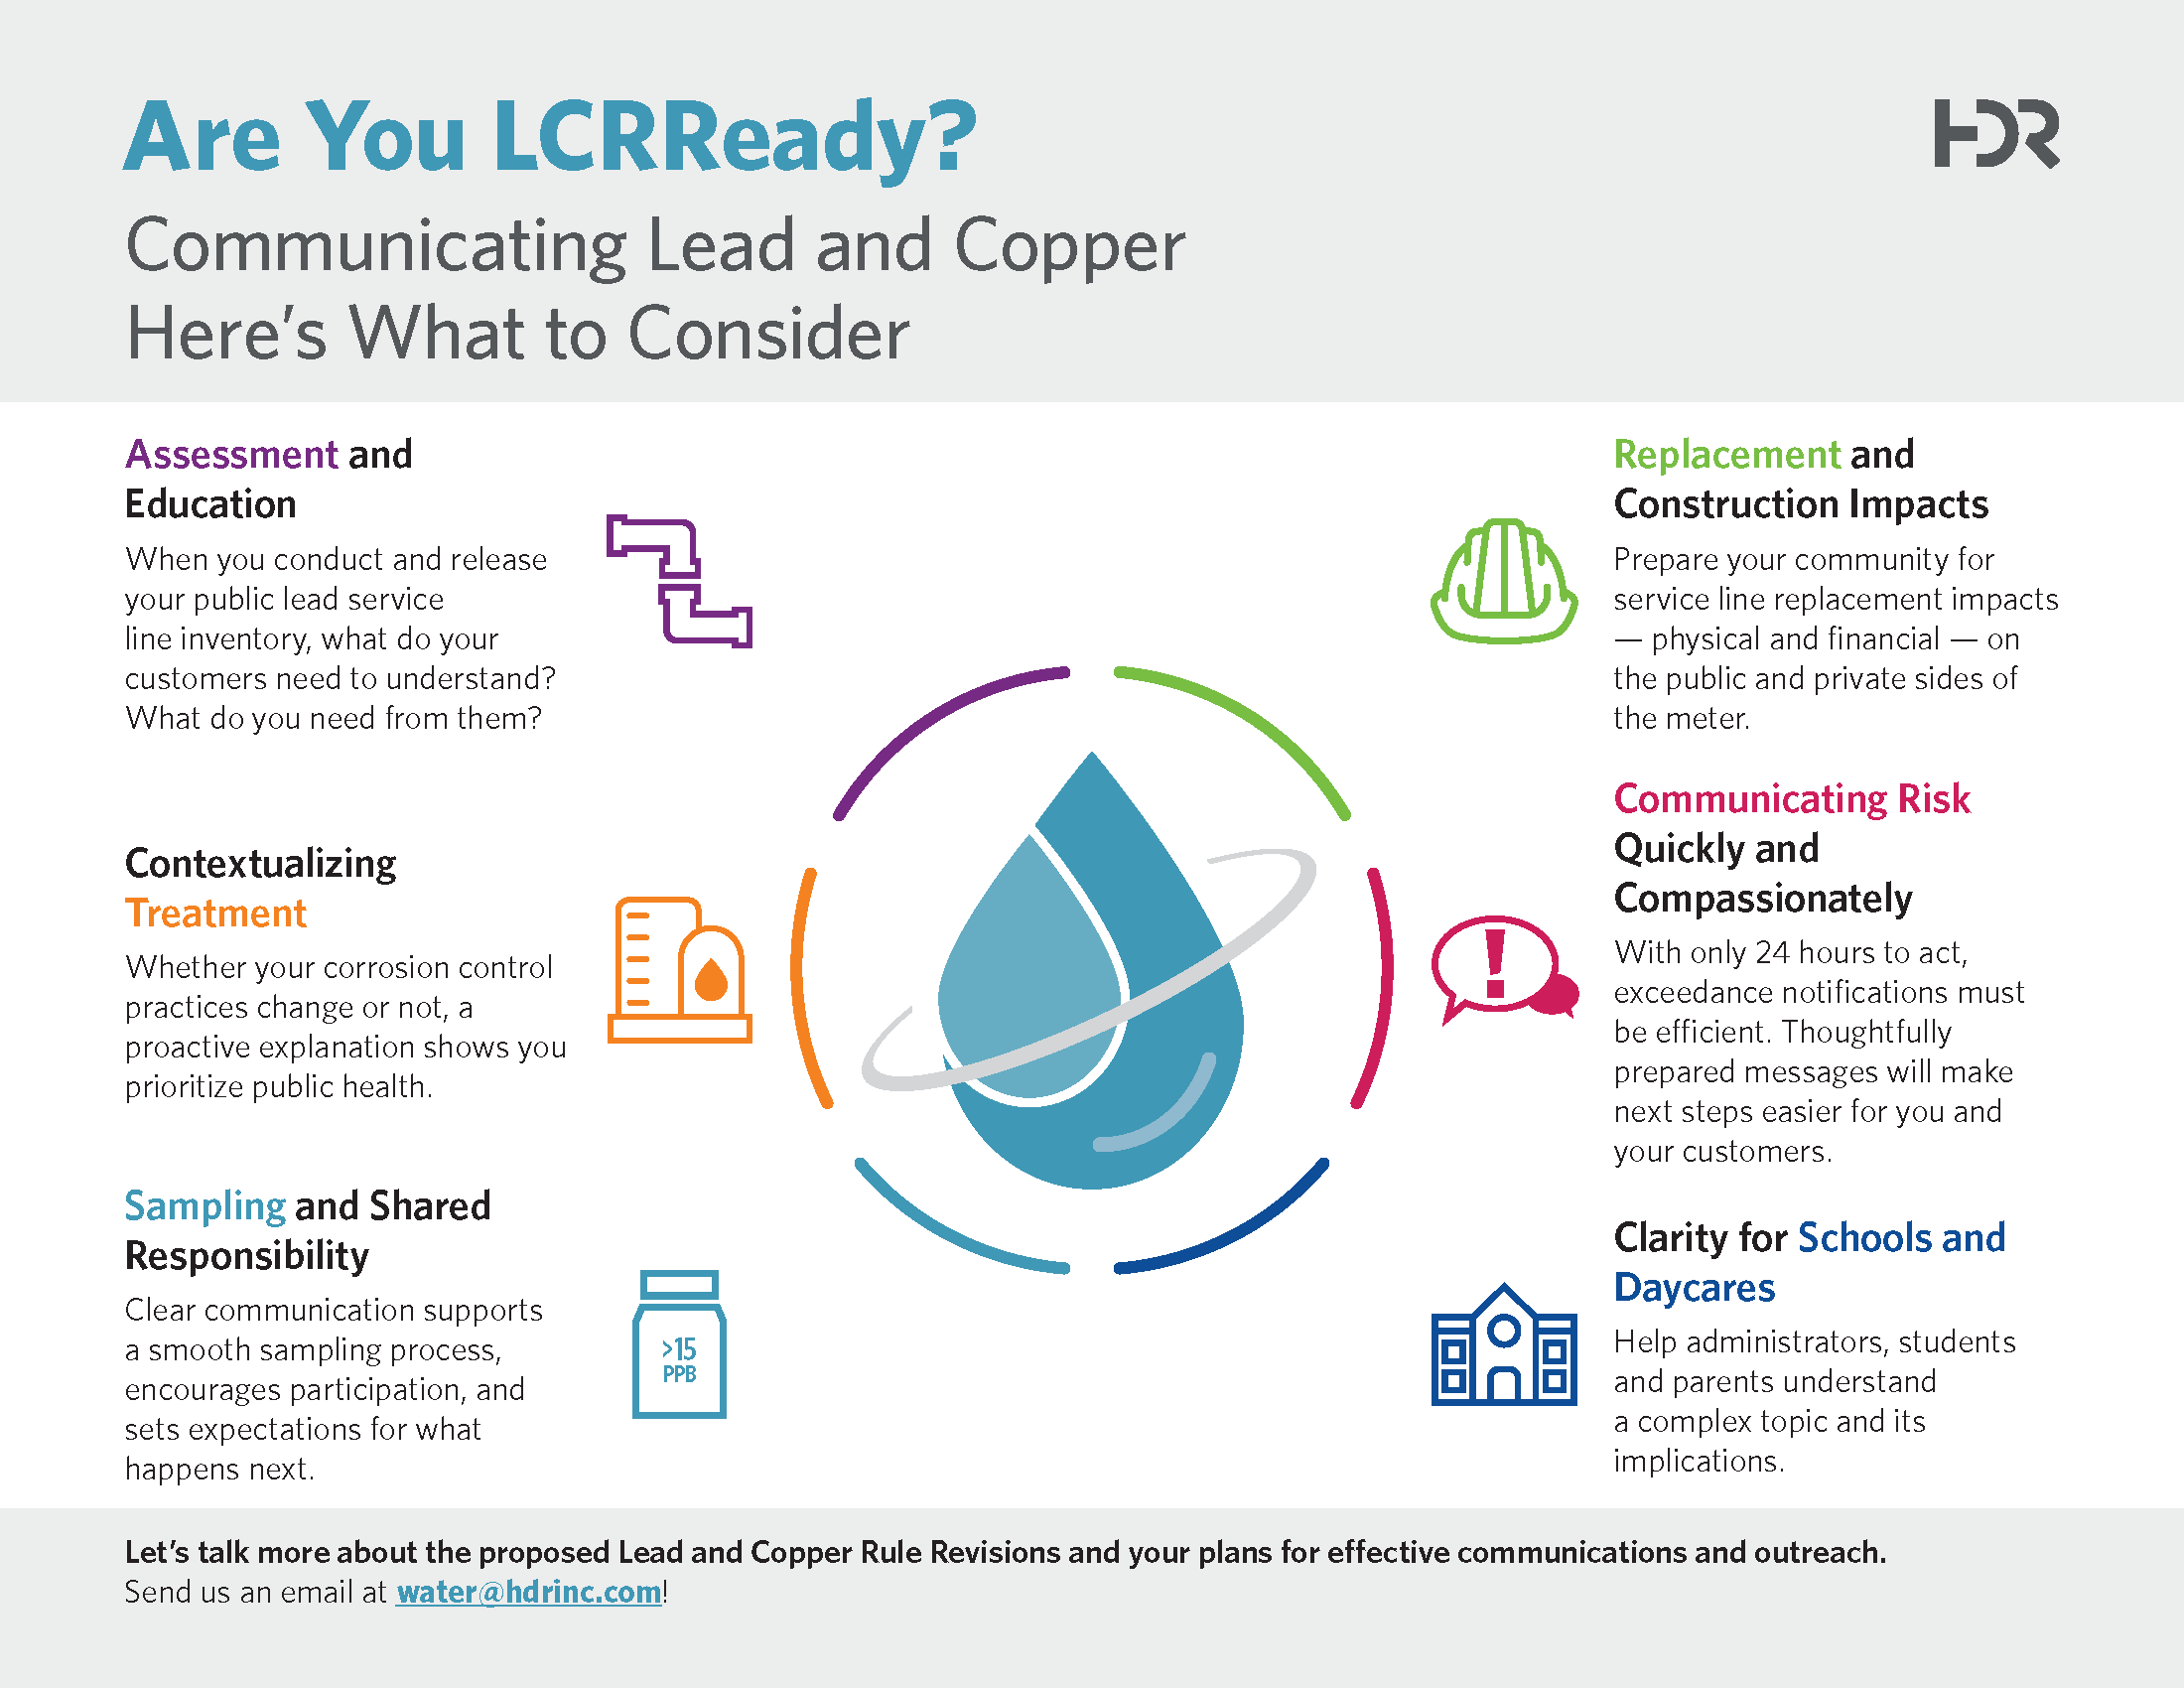 LCR Readiness Infographic